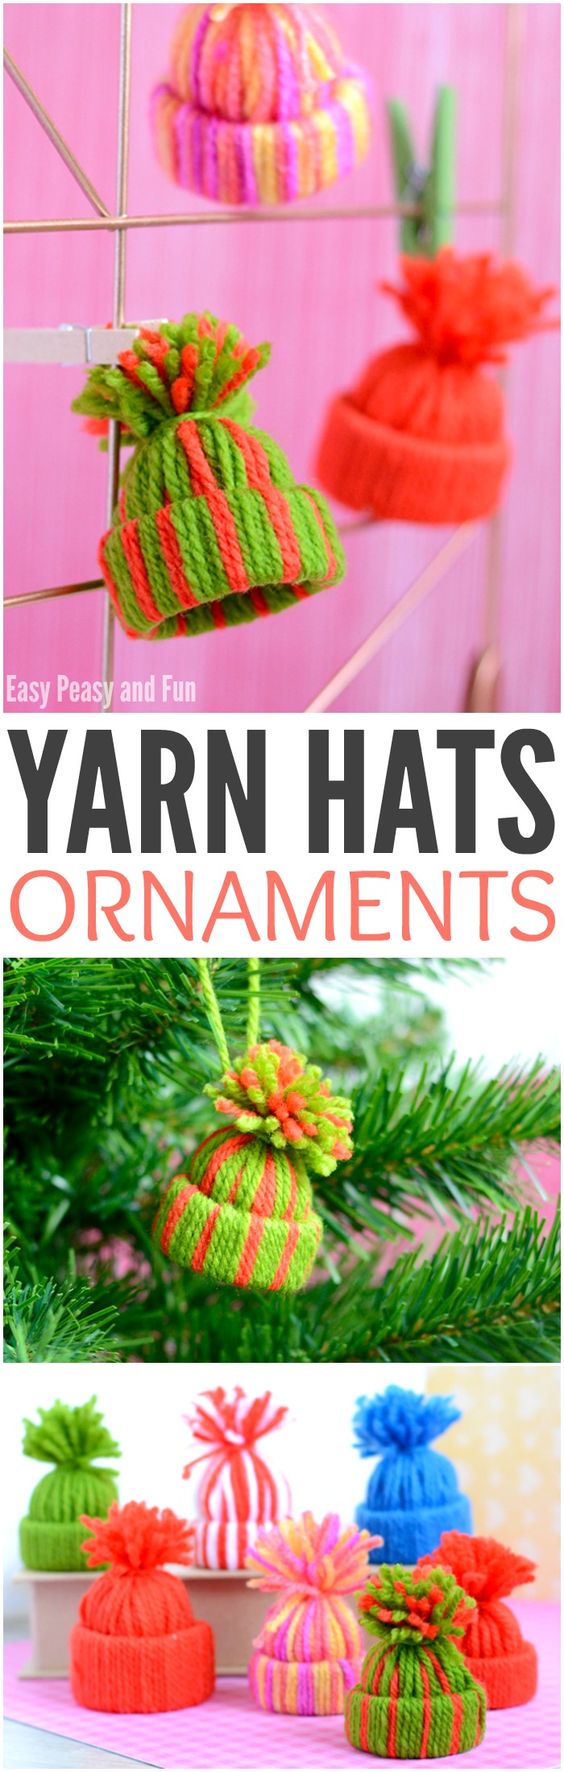 26 Adorable Handmade Christmas Ornaments - Pretty My Party